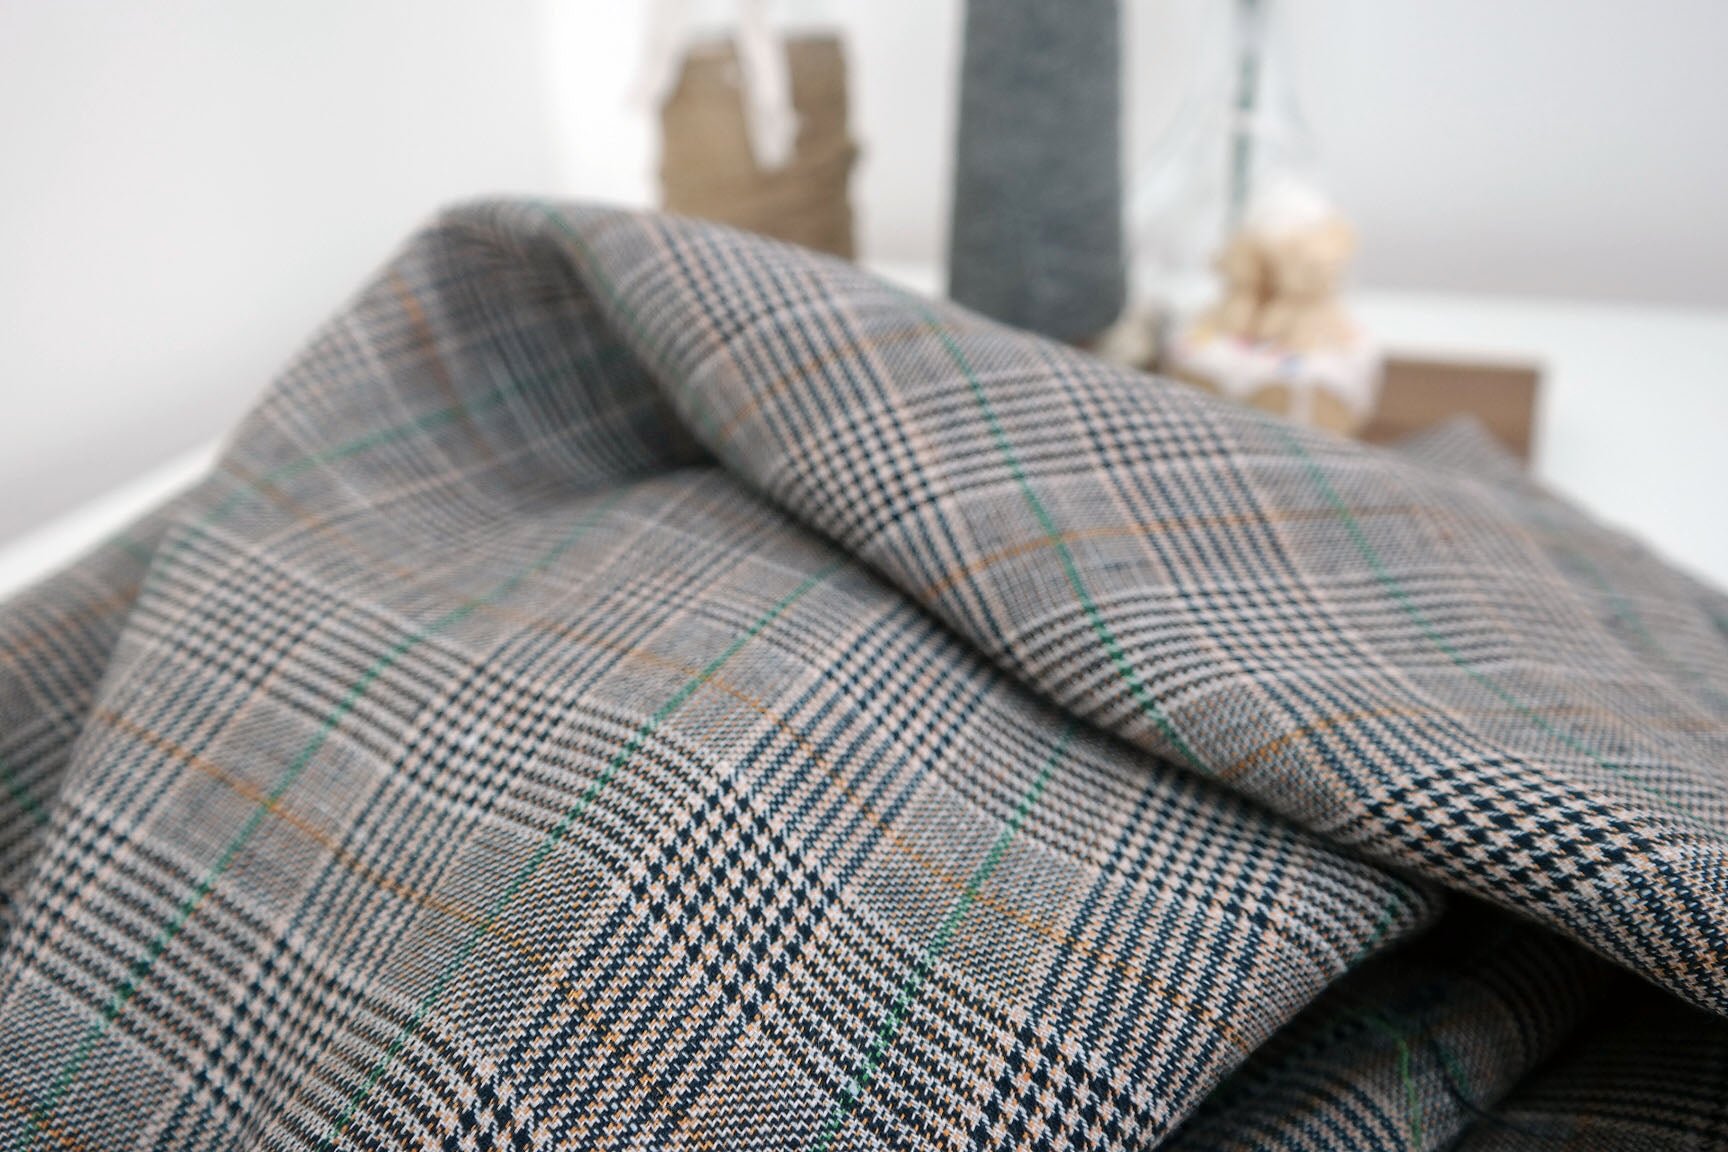 100% Linen Fabric Twill Multi Color Houndstooth Glen Plaid Medium Weight (6416) - The Linen Lab - Multi Colors